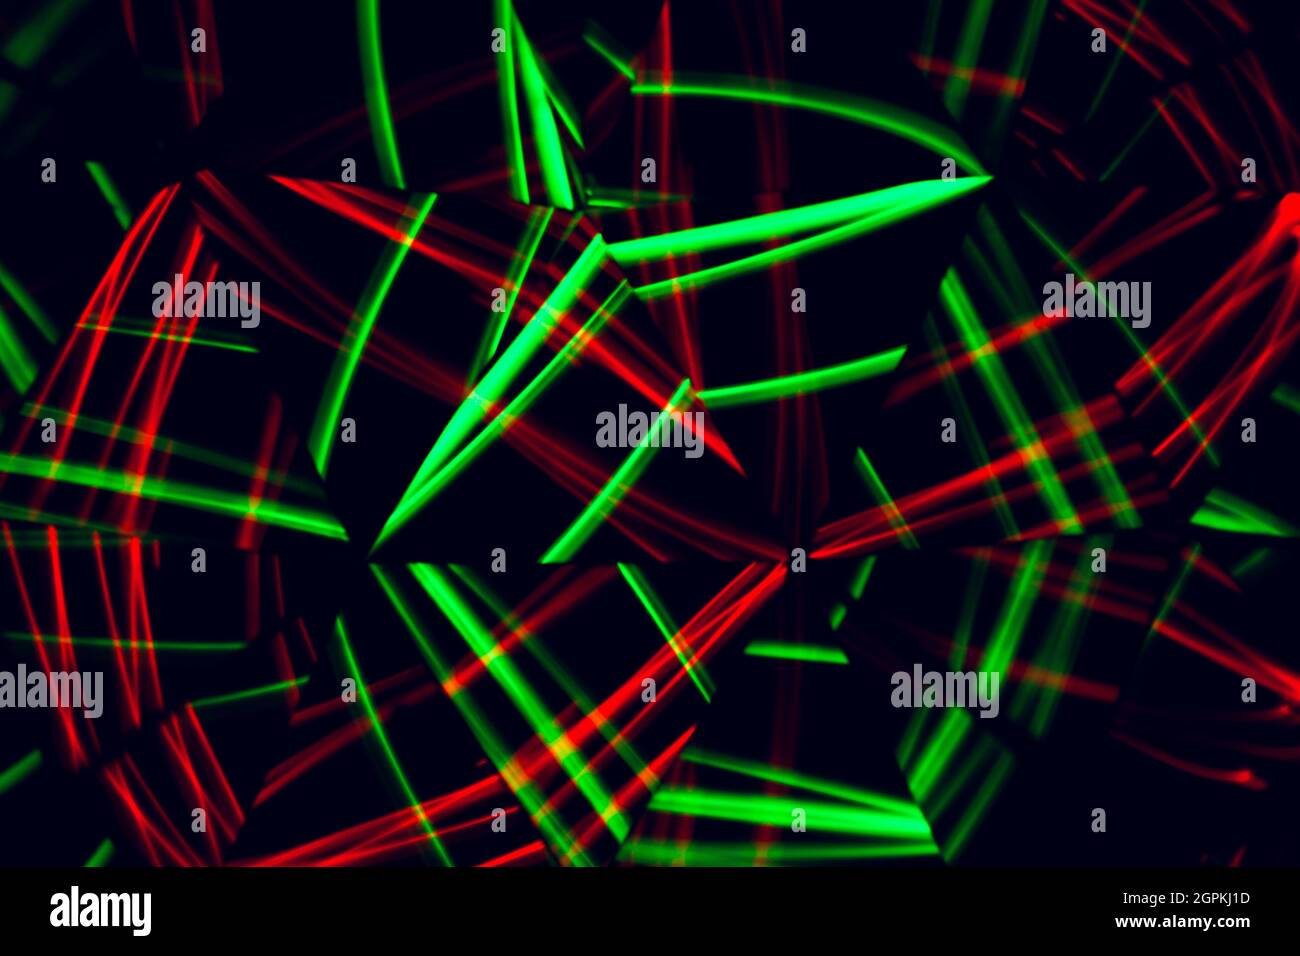 Abstract patterns of green and red colors. Colored lights in a long exposure light-painting photograph. Stock Photo